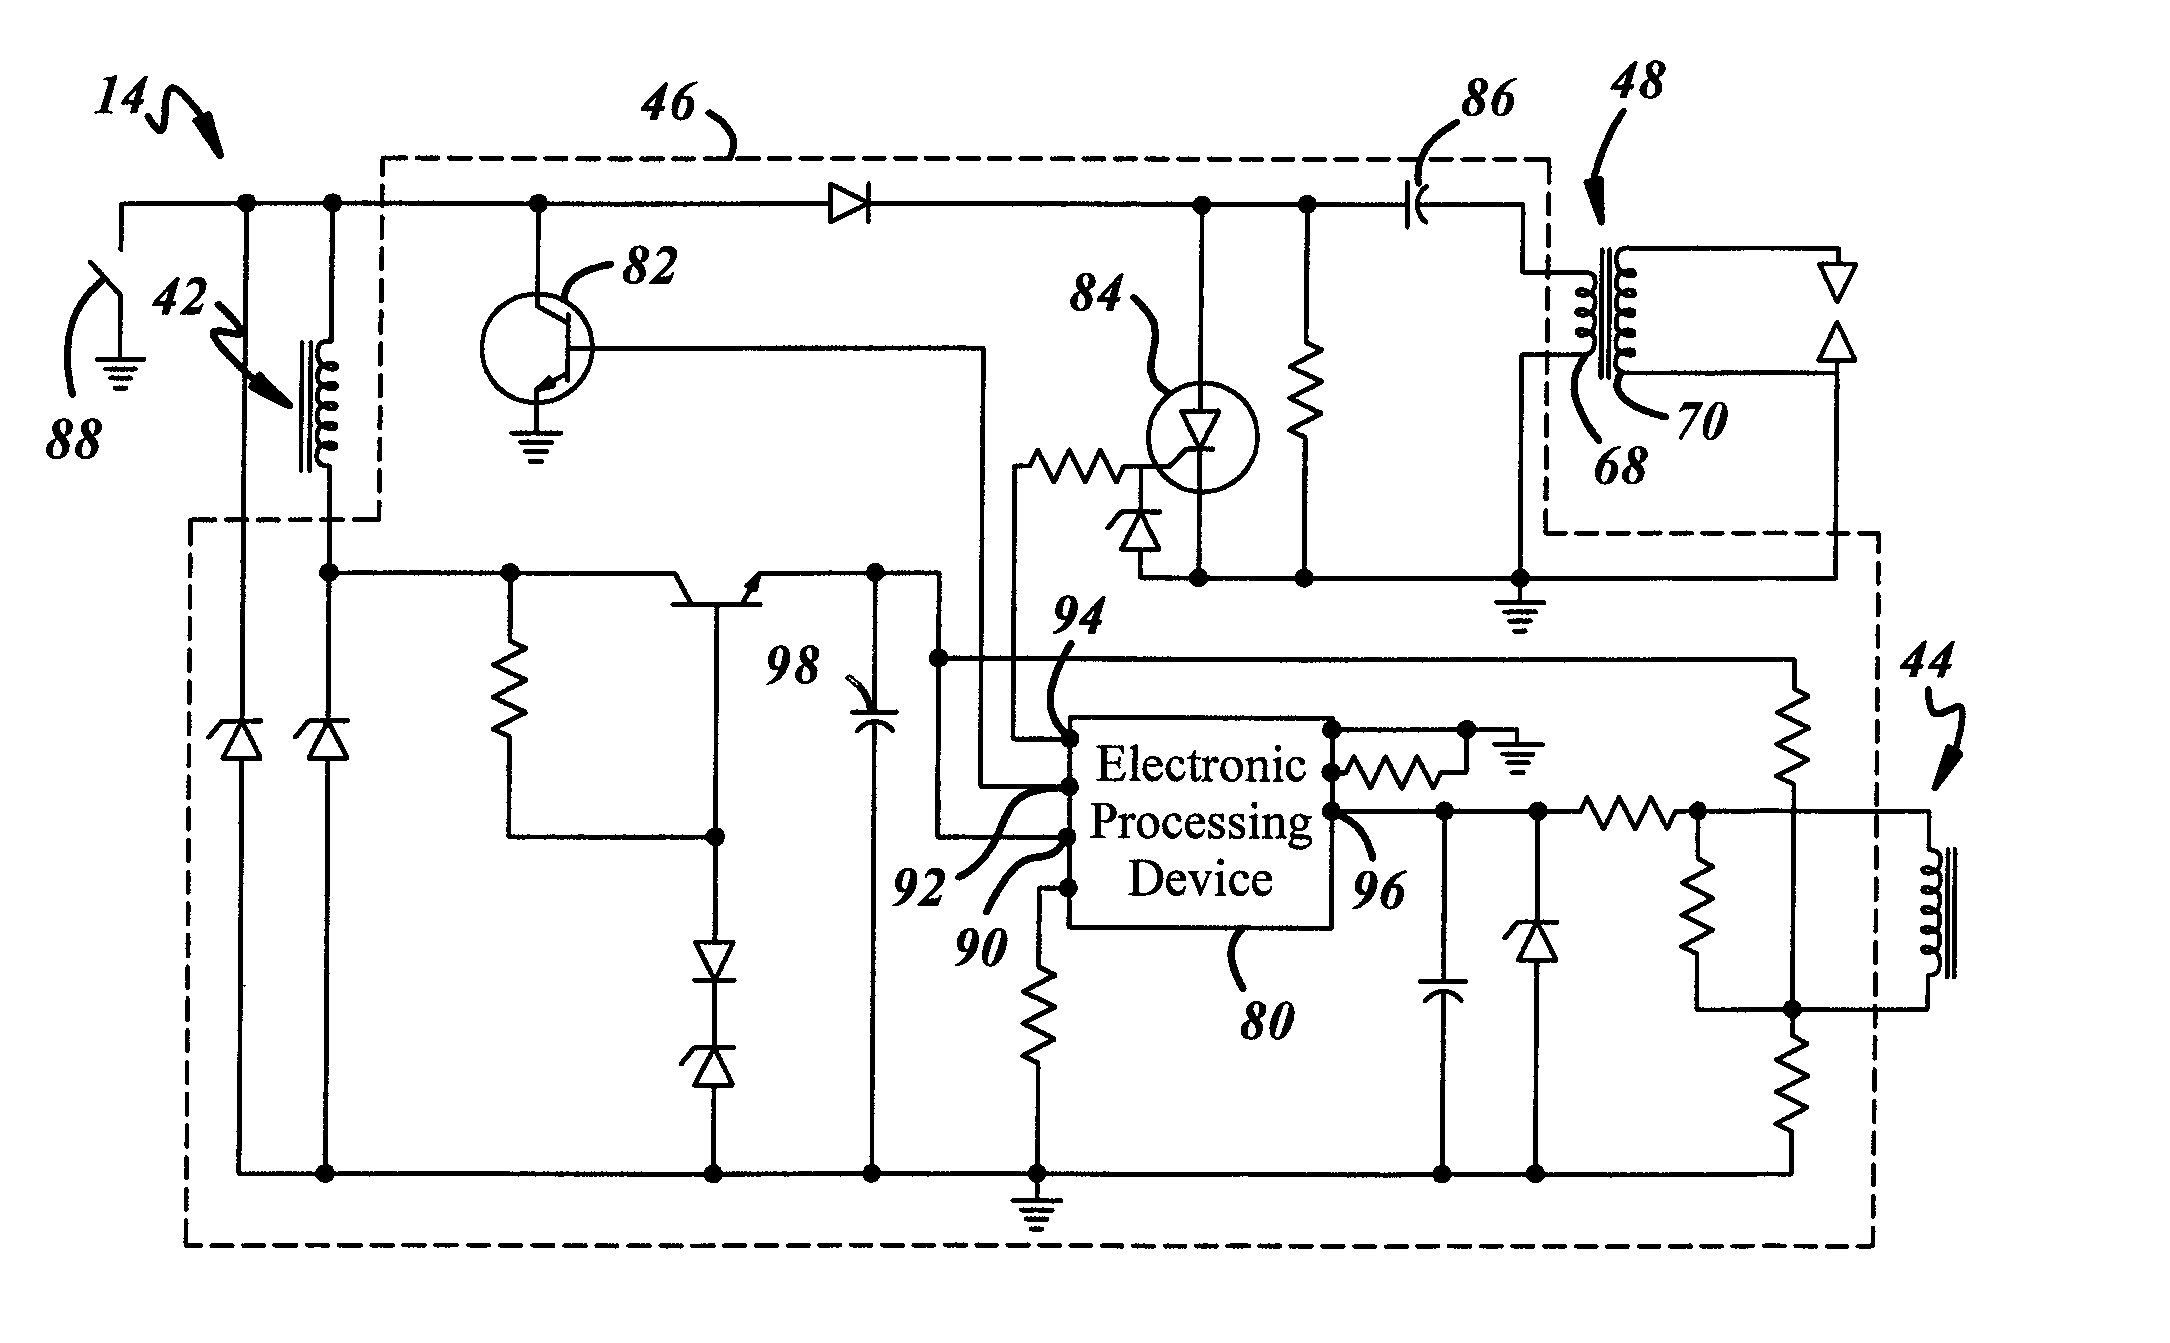 Ignition module for use with a light-duty internal combustion engine